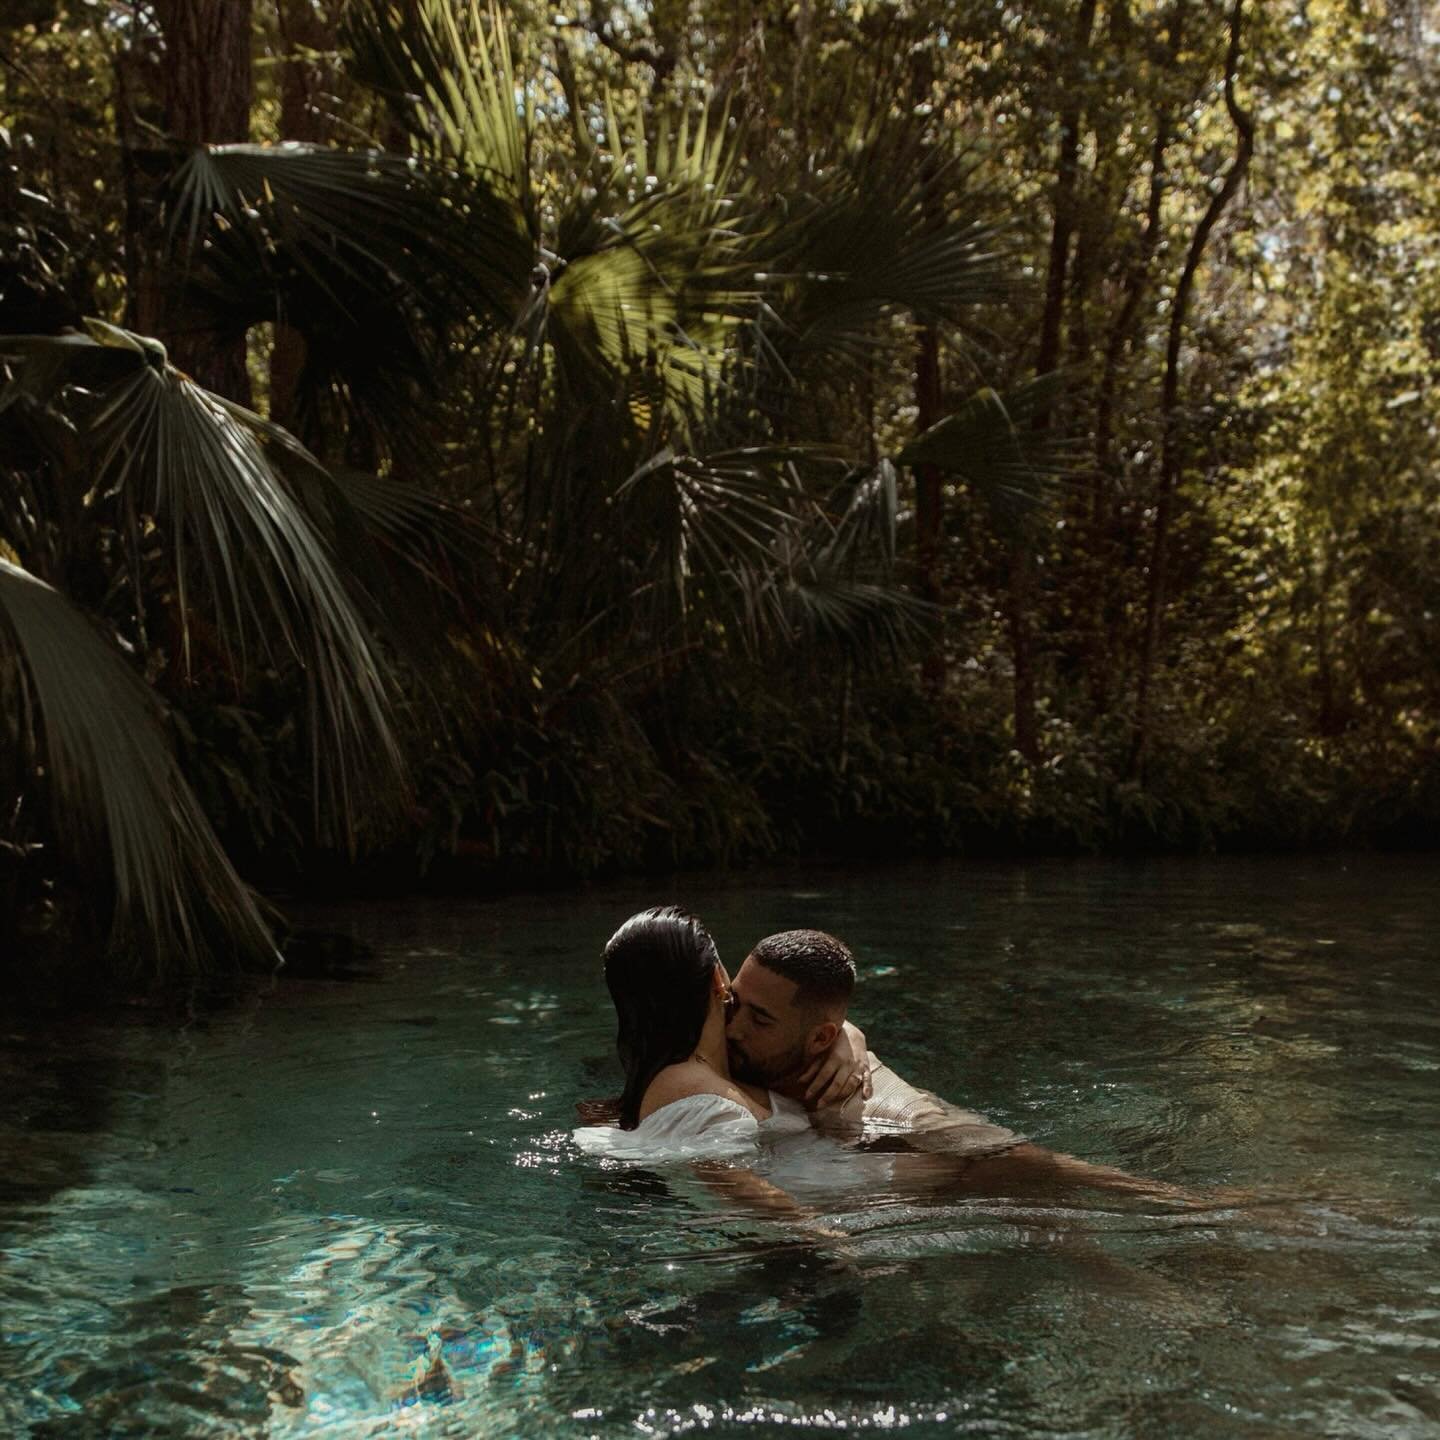 Reminiscing on the magic of the Florida Springs and especially being able to capture the ethereality of Ali and Marcos engagement.

The way the sun peeked through the tall green foliage and glistened upon these two was otherworldly.

Now new on my bl